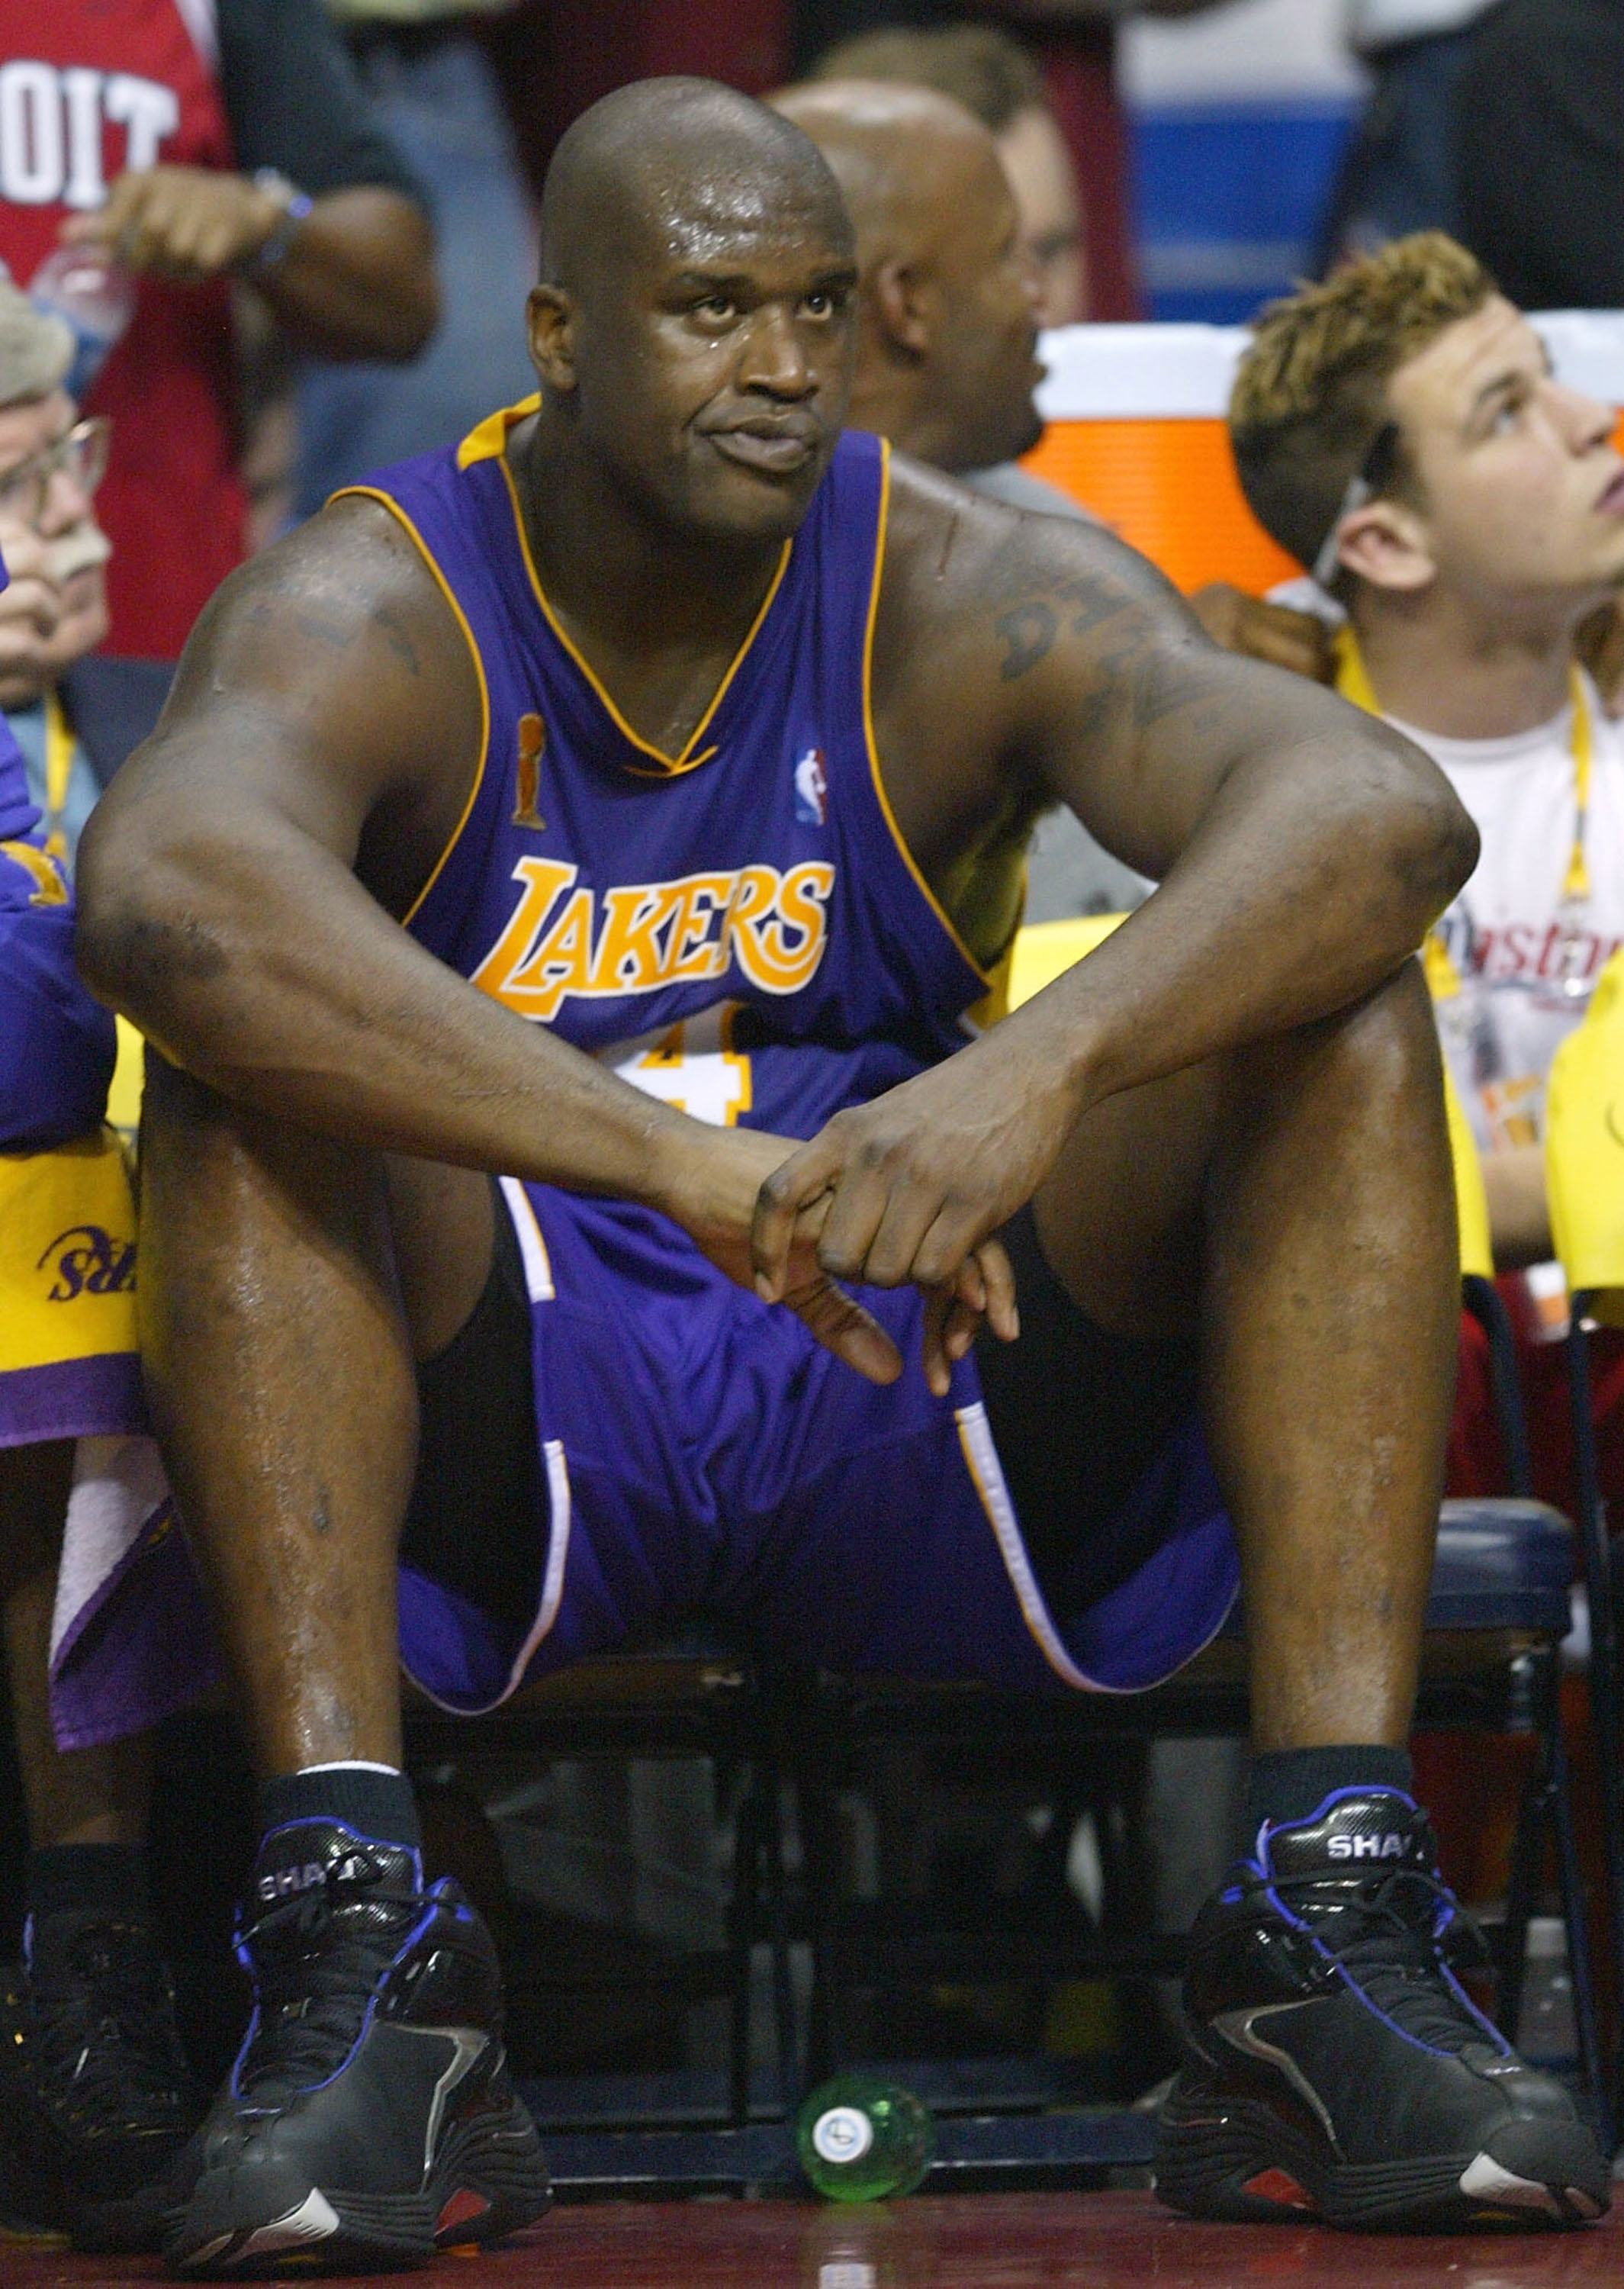 AUBURN HILLS, MI - JUNE 15:  Shaquille O'Neal #34 of the Los Angeles Lakers looks on from the bench in the fourth quarter of game five of the 2004 NBA Finals against the Detroit Pistons on June 15, 2004 at The Palace of Auburn Hills in Auburn Hills, Michi